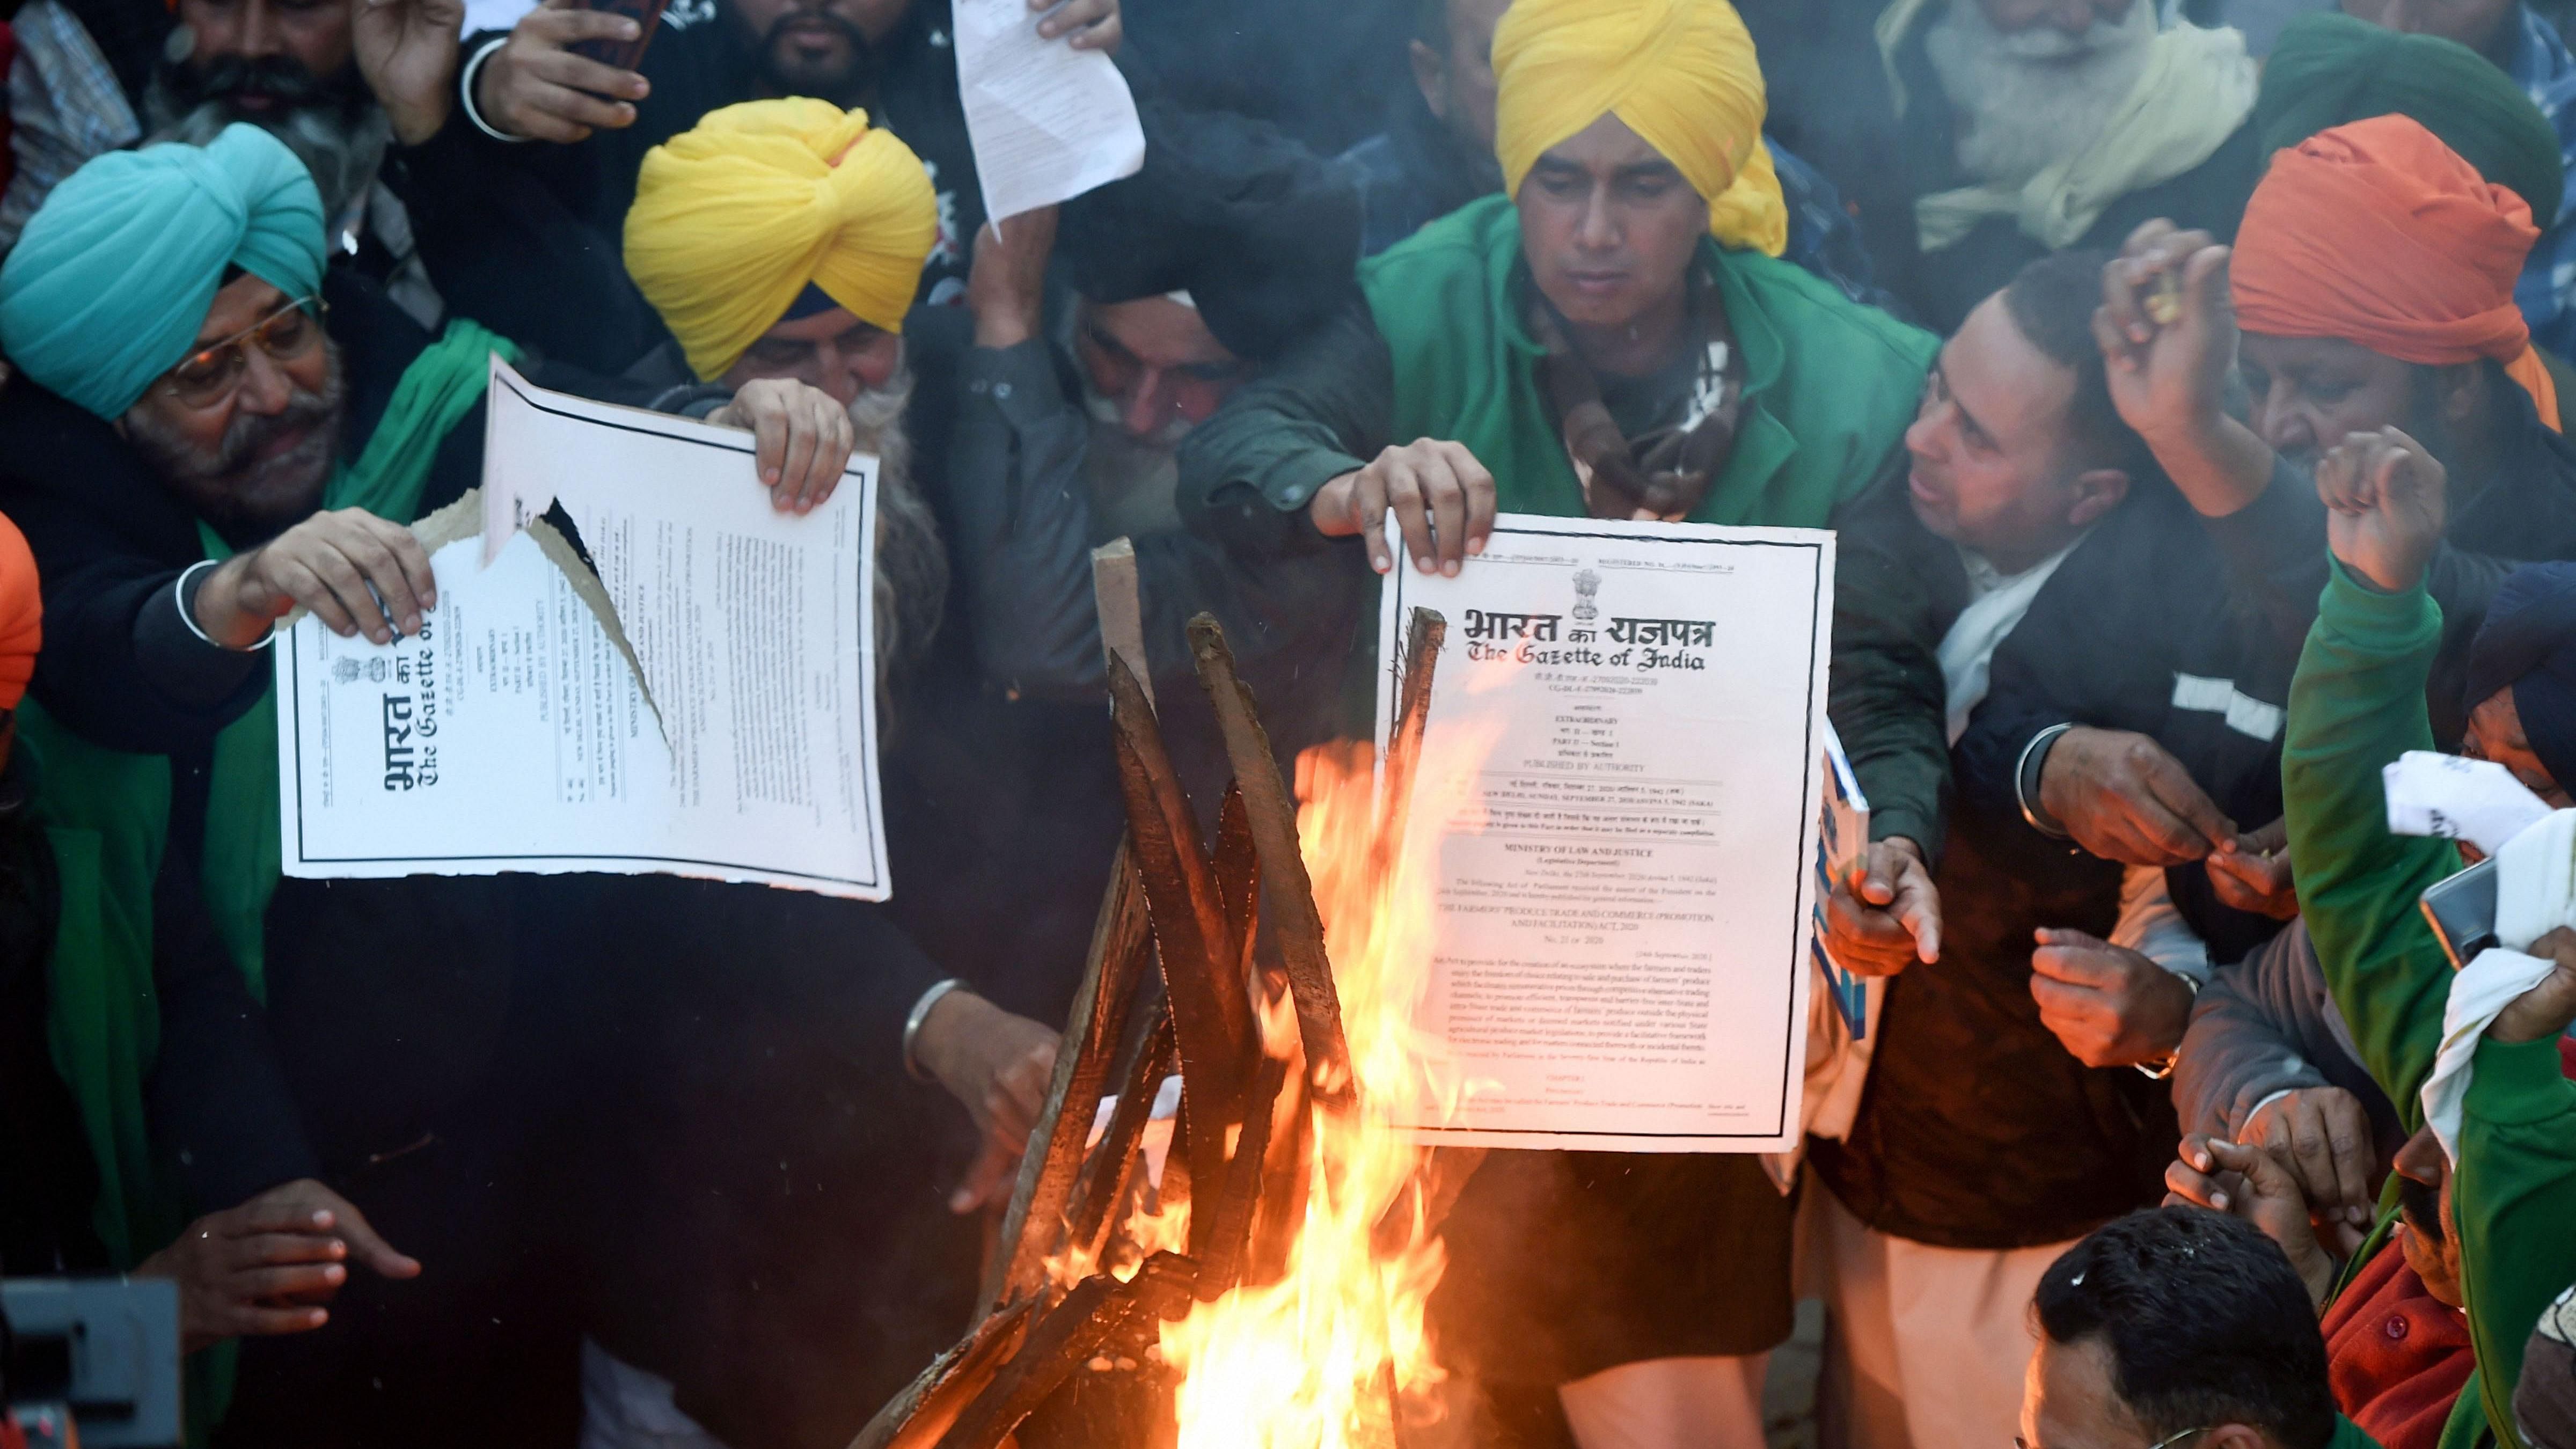 Thousands of farmers, mostly from Punjab and Haryana, have been camping at several Delhi border points, demanding a complete repeal of the three farm laws and legal guarantee of minimum support price for their crops. Credit: PTI